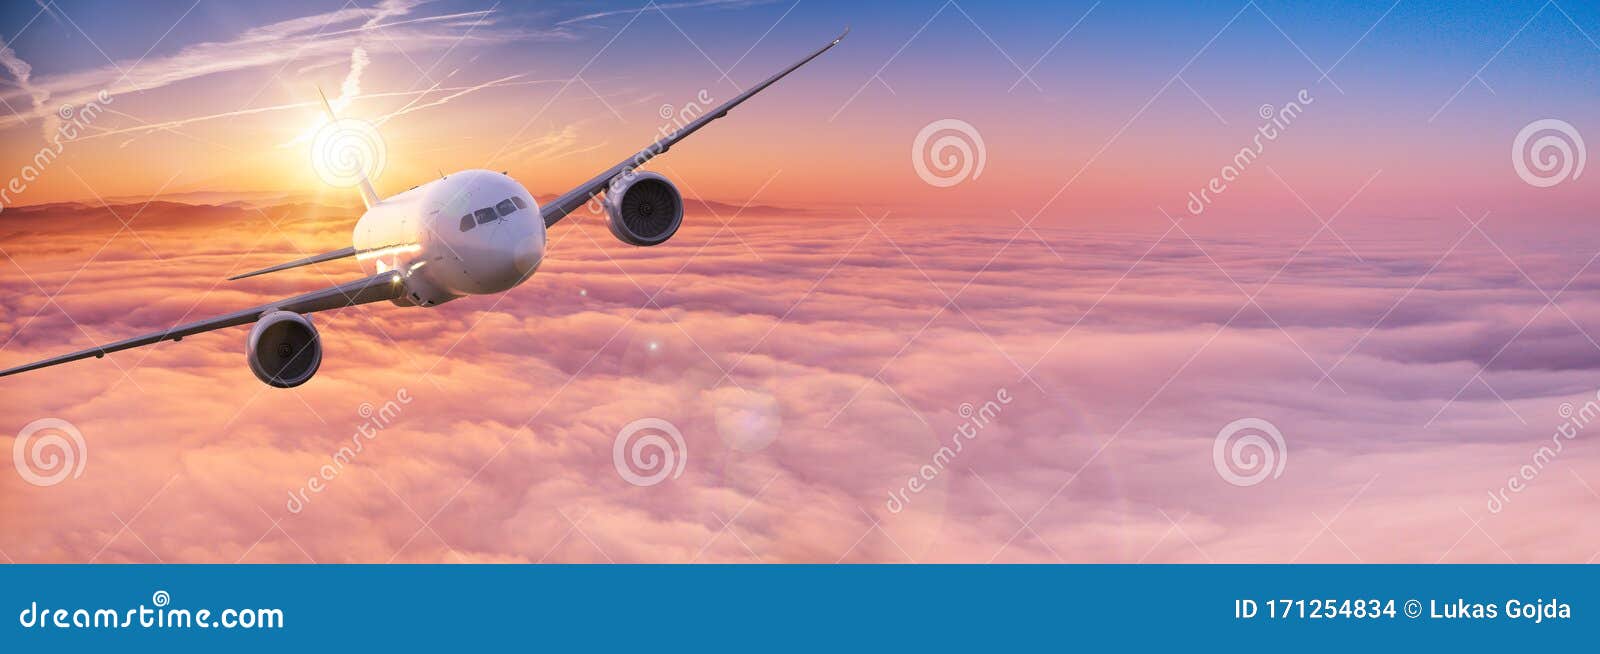 Commercial Airplane Jetliner Flying Above Dramatic Clouds. Stock Photo